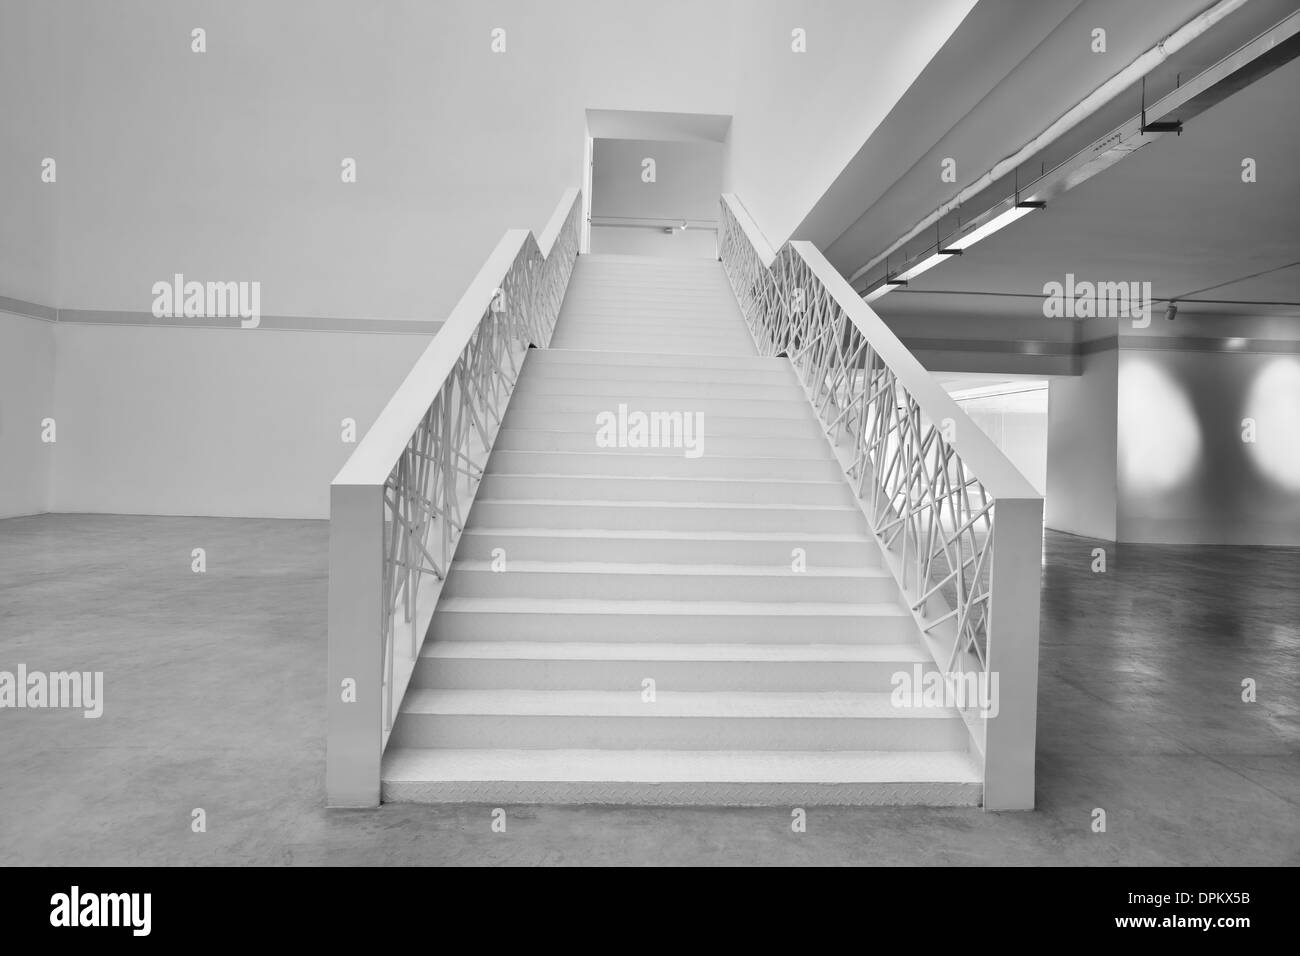 Empty office building stairway composition Stock Photo